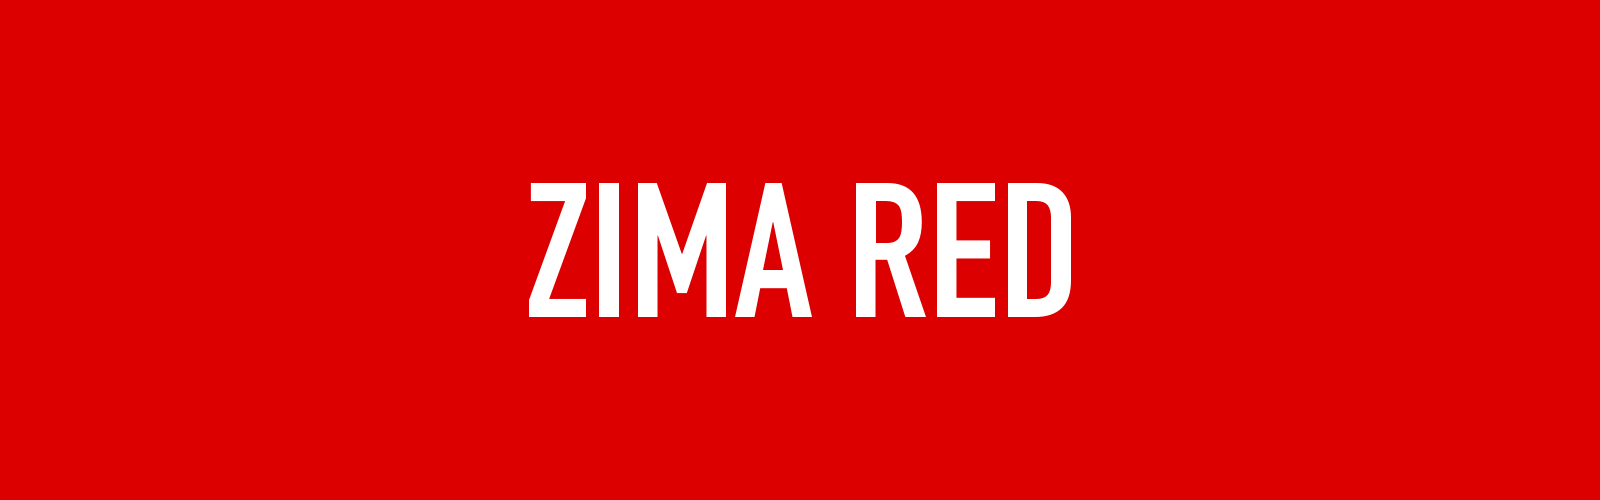 NFT ProofofWork Art Edition March 2020 Zima Red